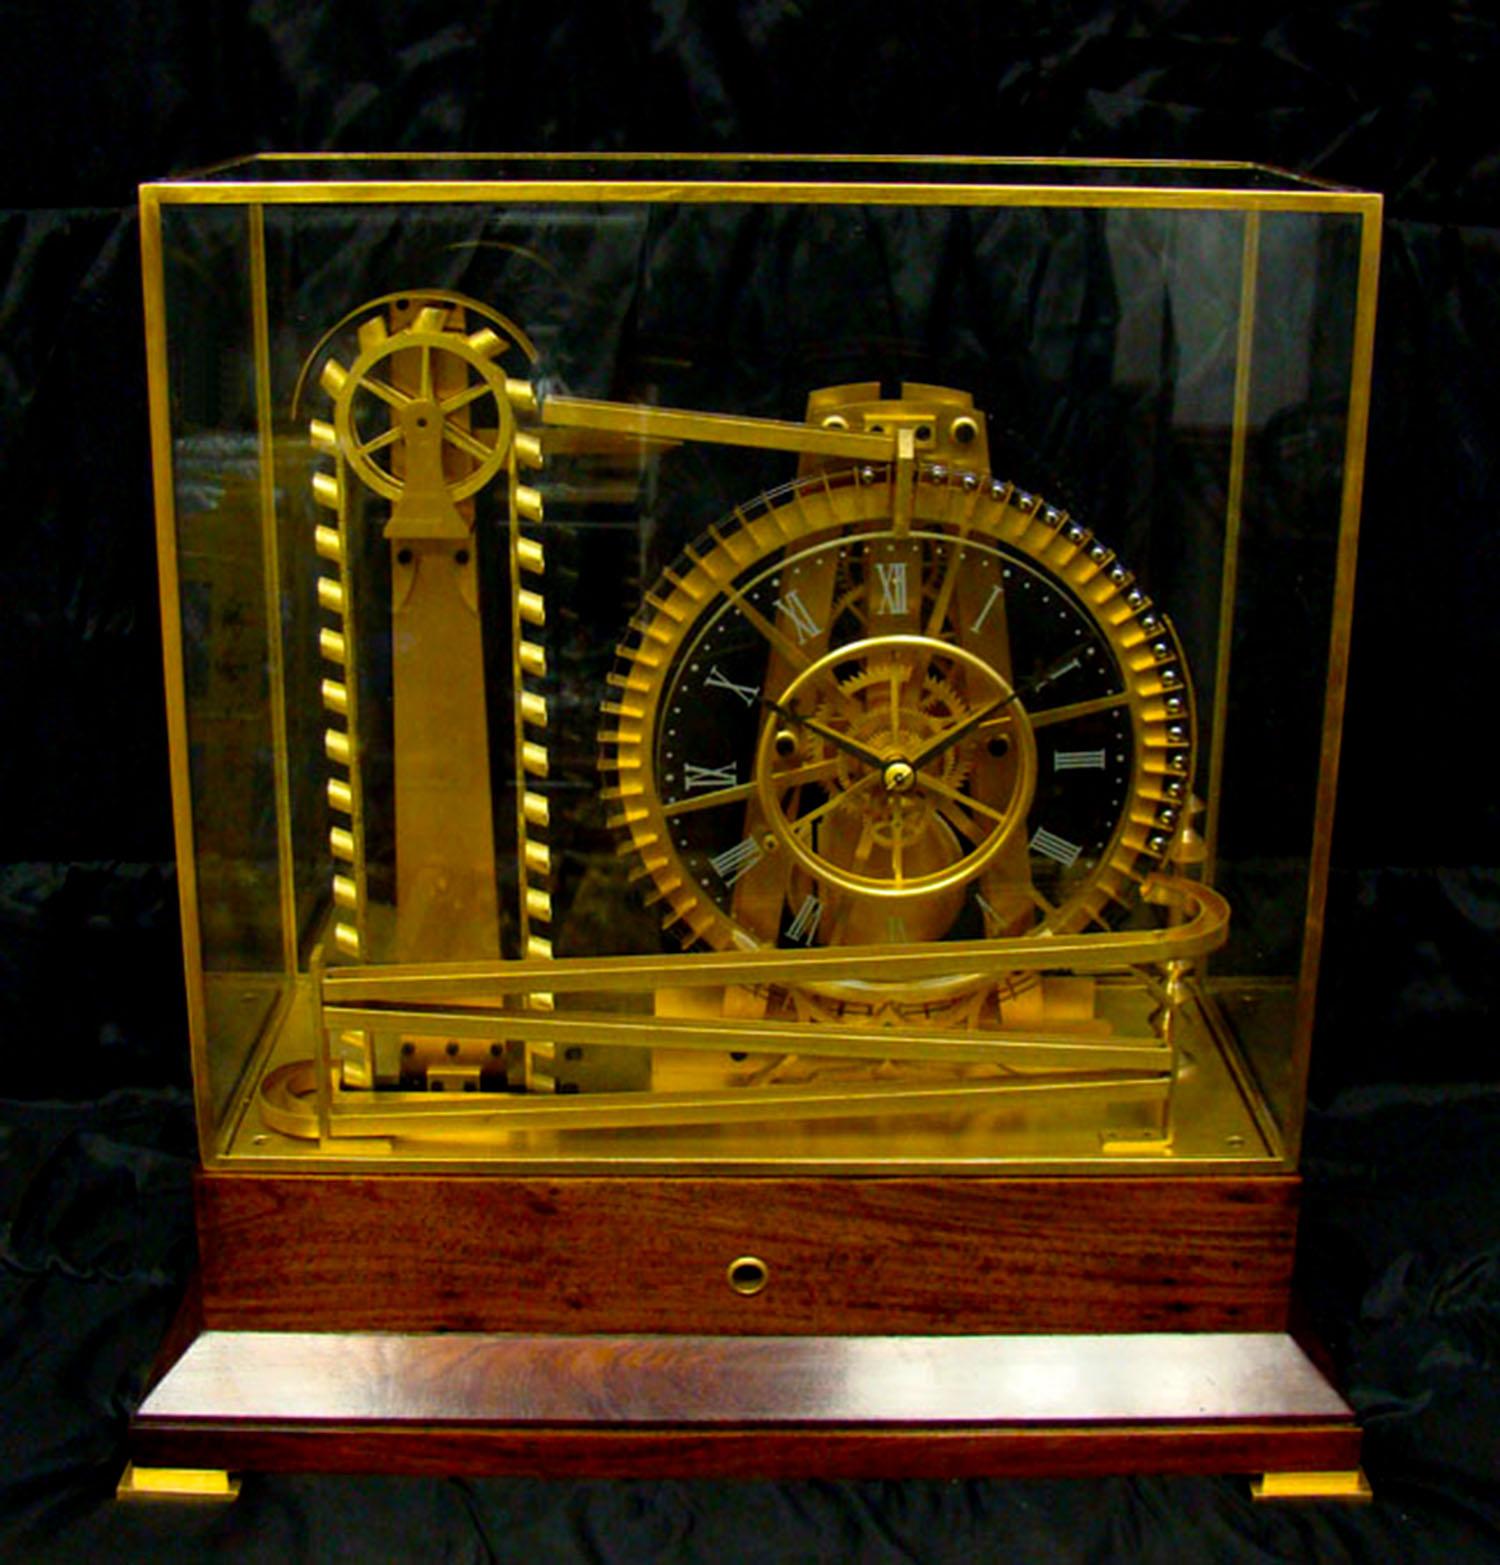 For your consideration is a mystery Water Wheel Industrial Ball Bearing Clock. It comes with an 8 day movement and keeps very good time!! This water wheel industrial clock has a big paddle wheel on the right side which hold a a set of small steel